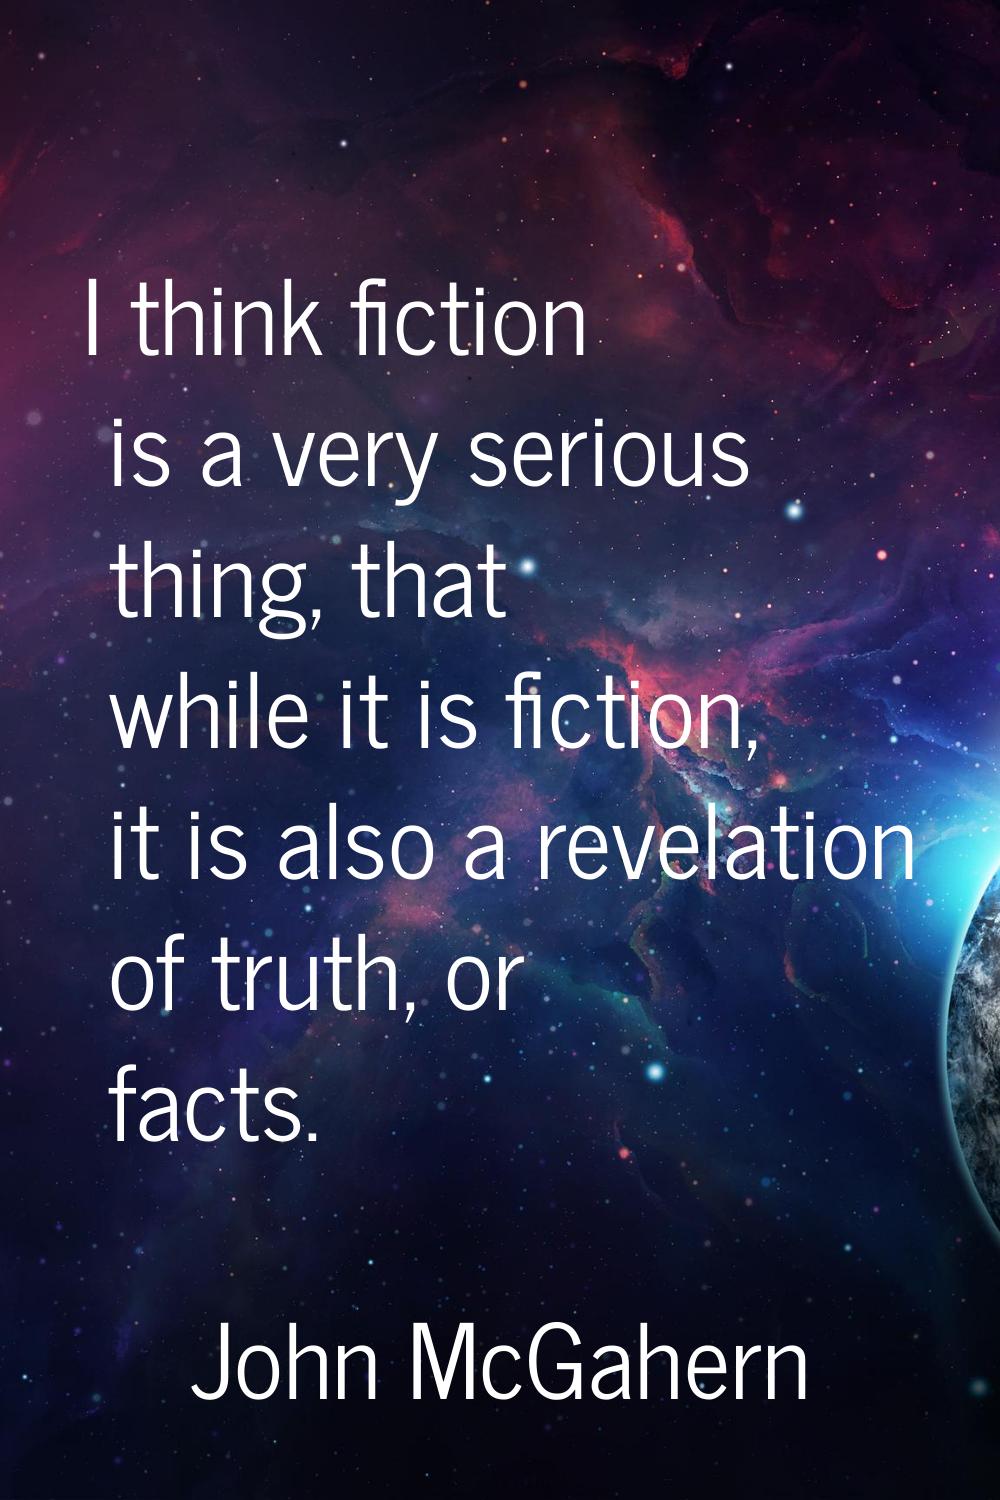 I think fiction is a very serious thing, that while it is fiction, it is also a revelation of truth